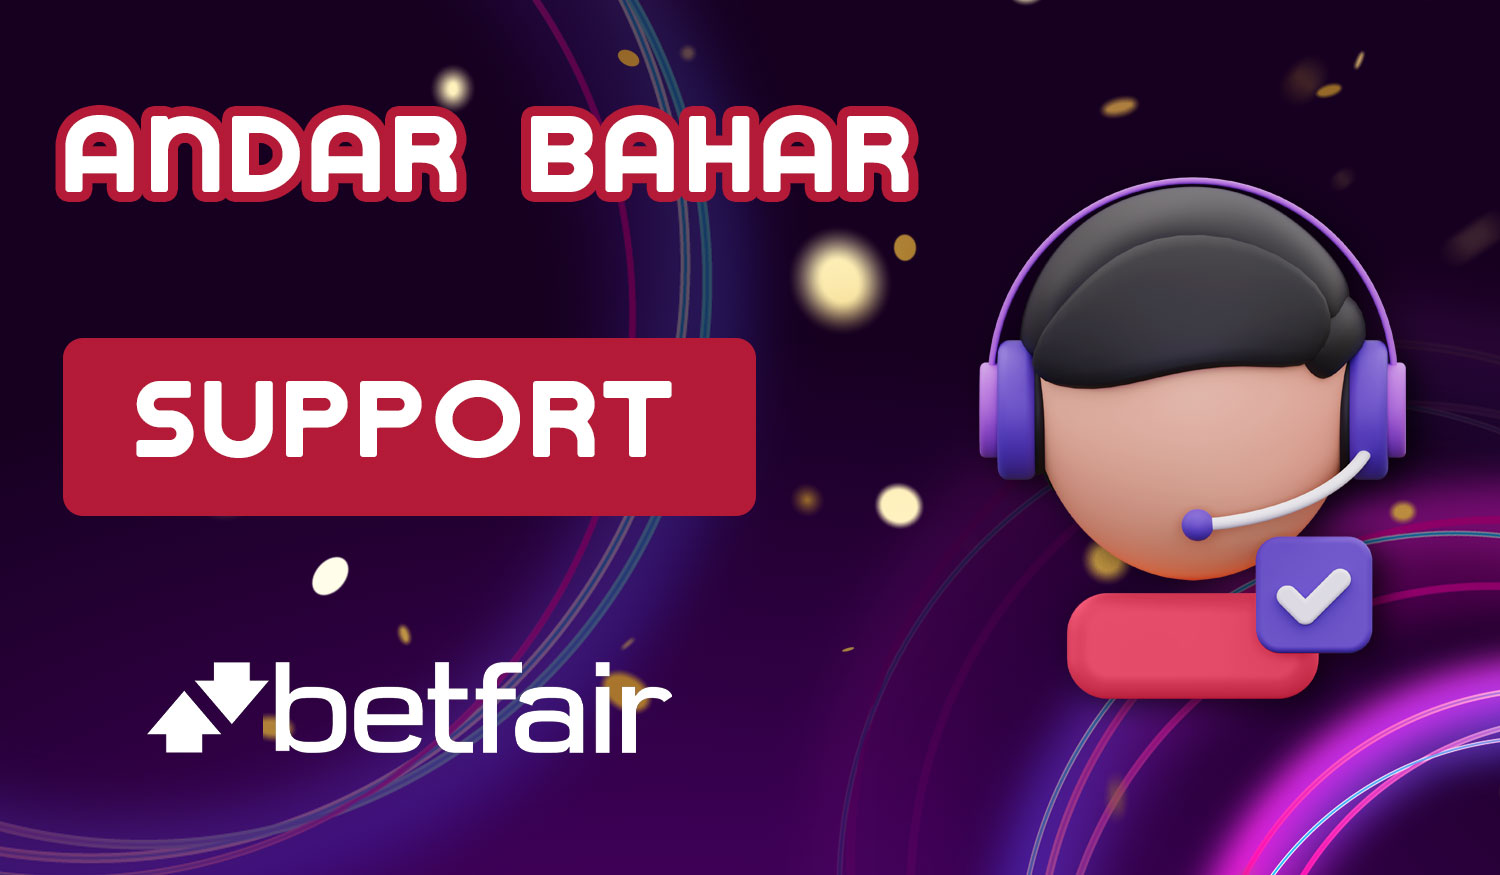 The Betfair platform provides 24/7 support for players from India